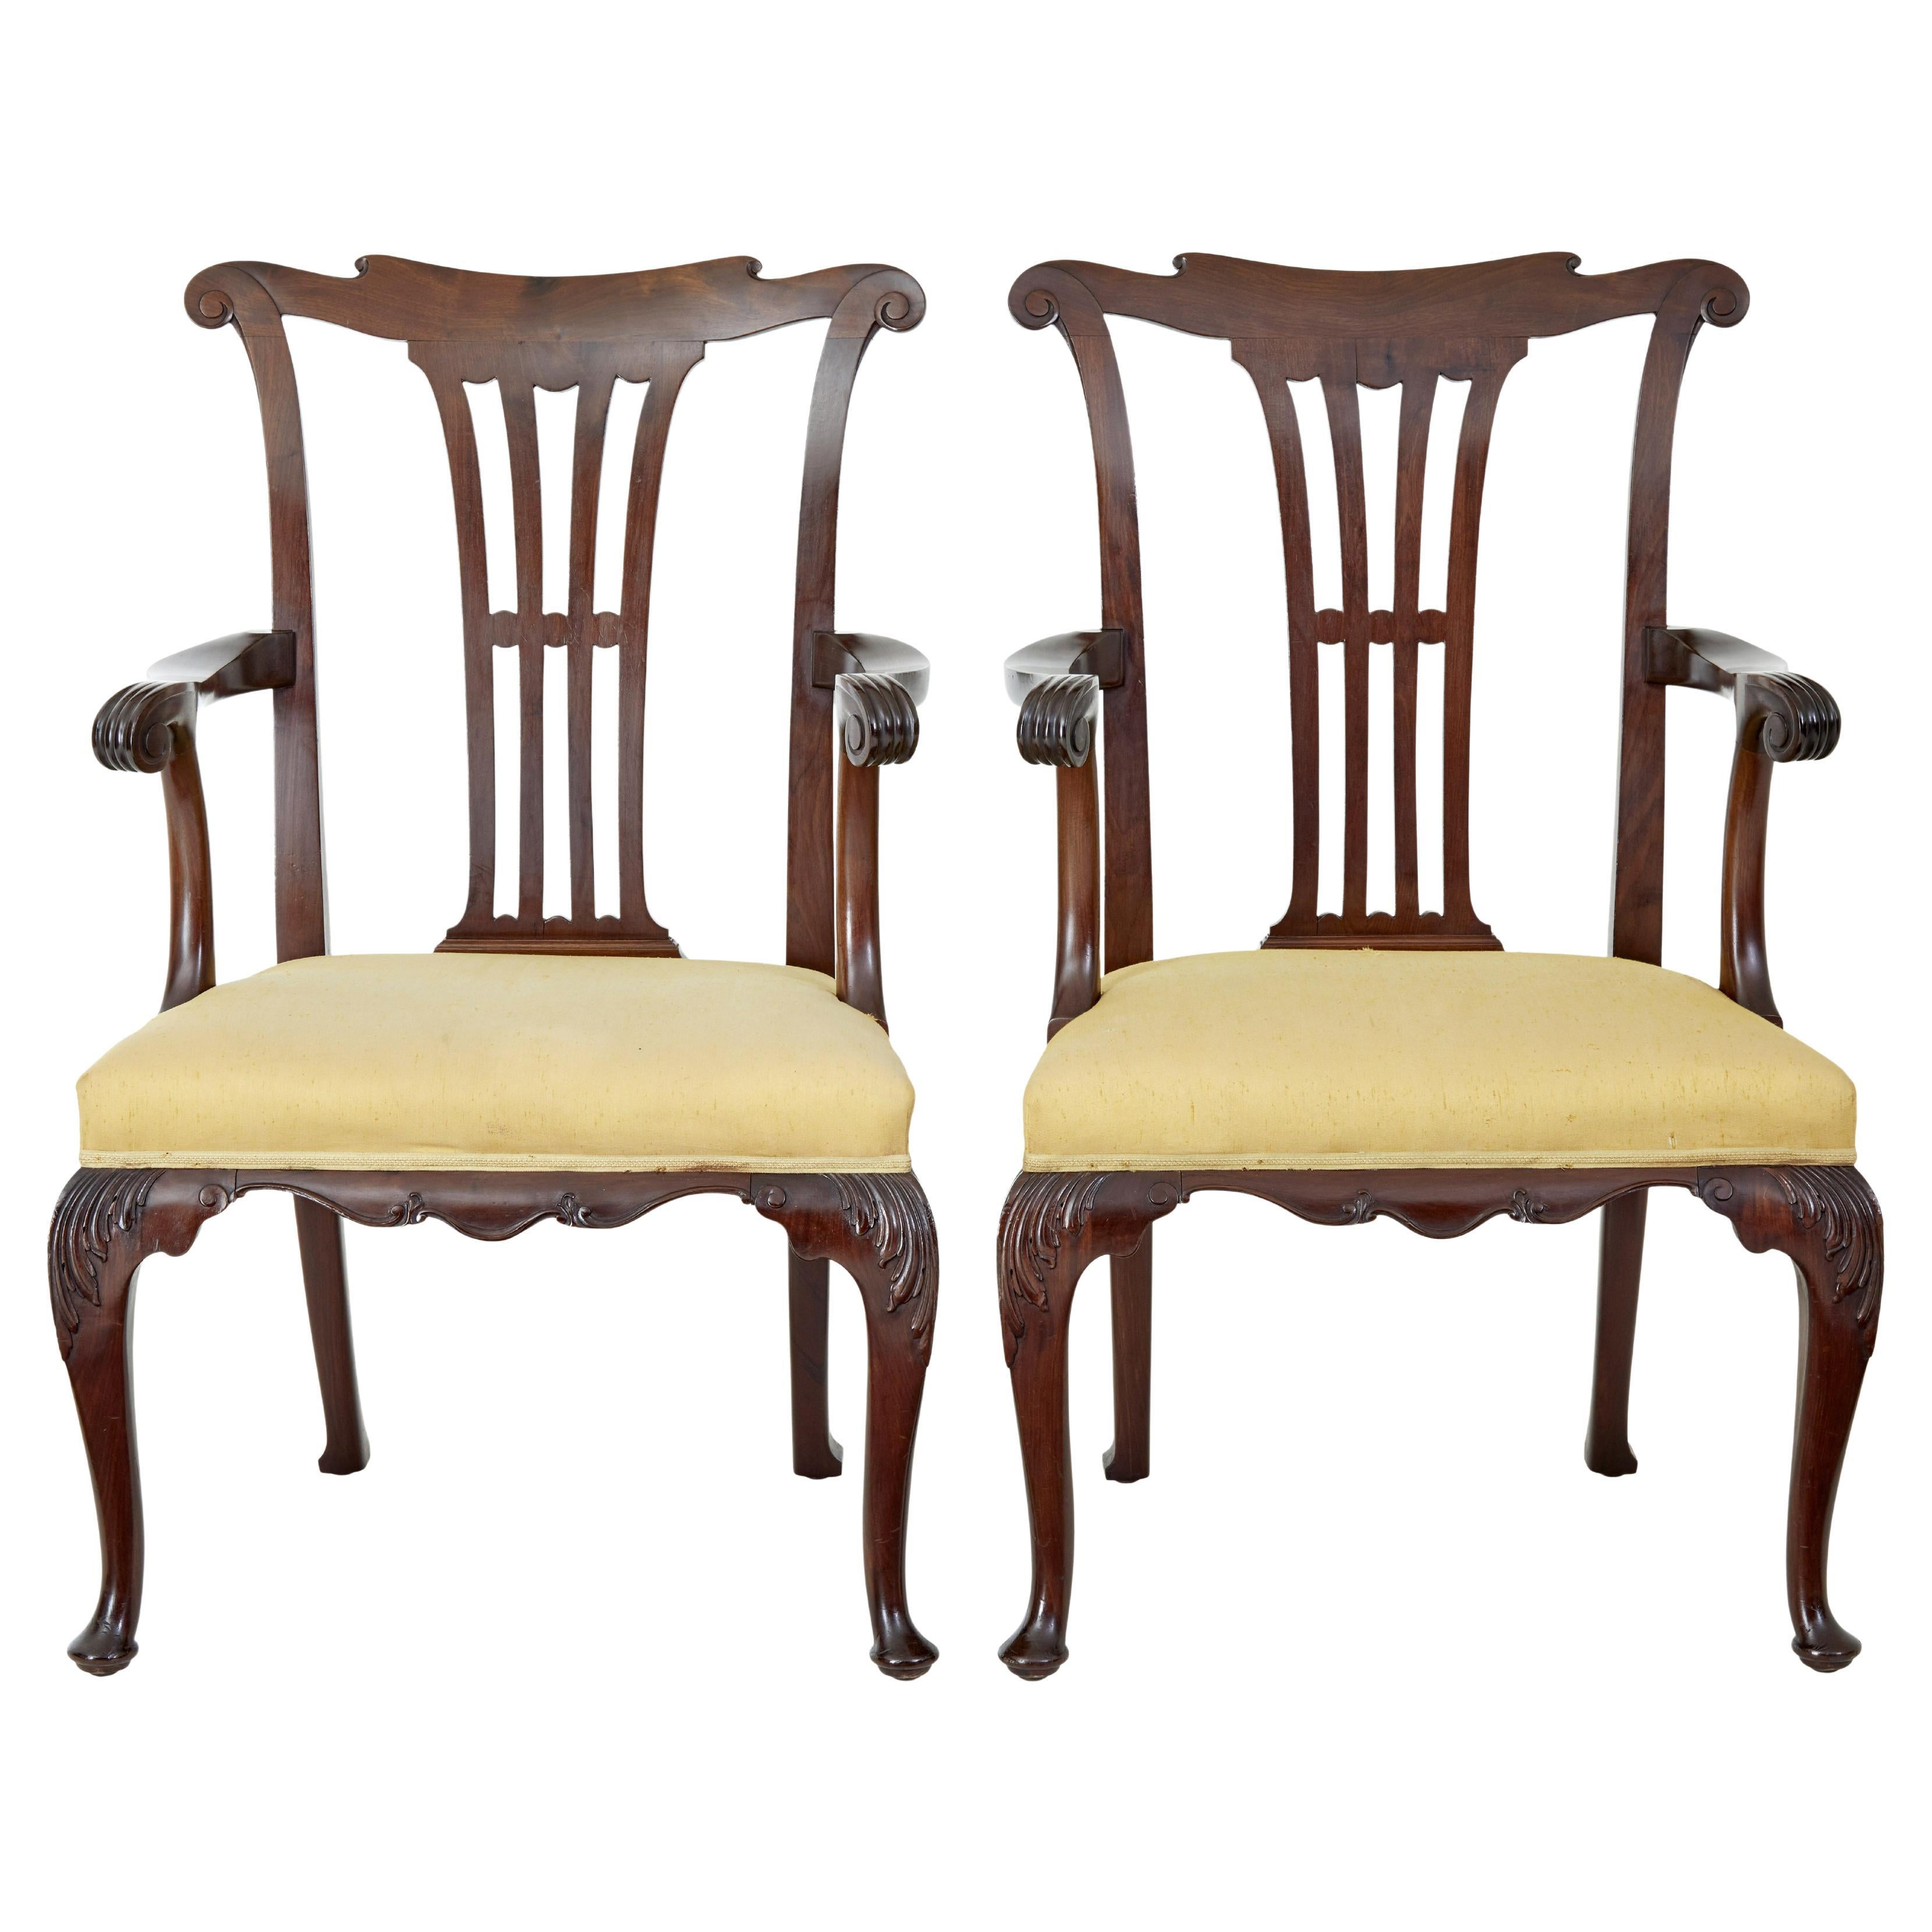 Pair of 19th Century Chippendale Design Mahogany Armchairs